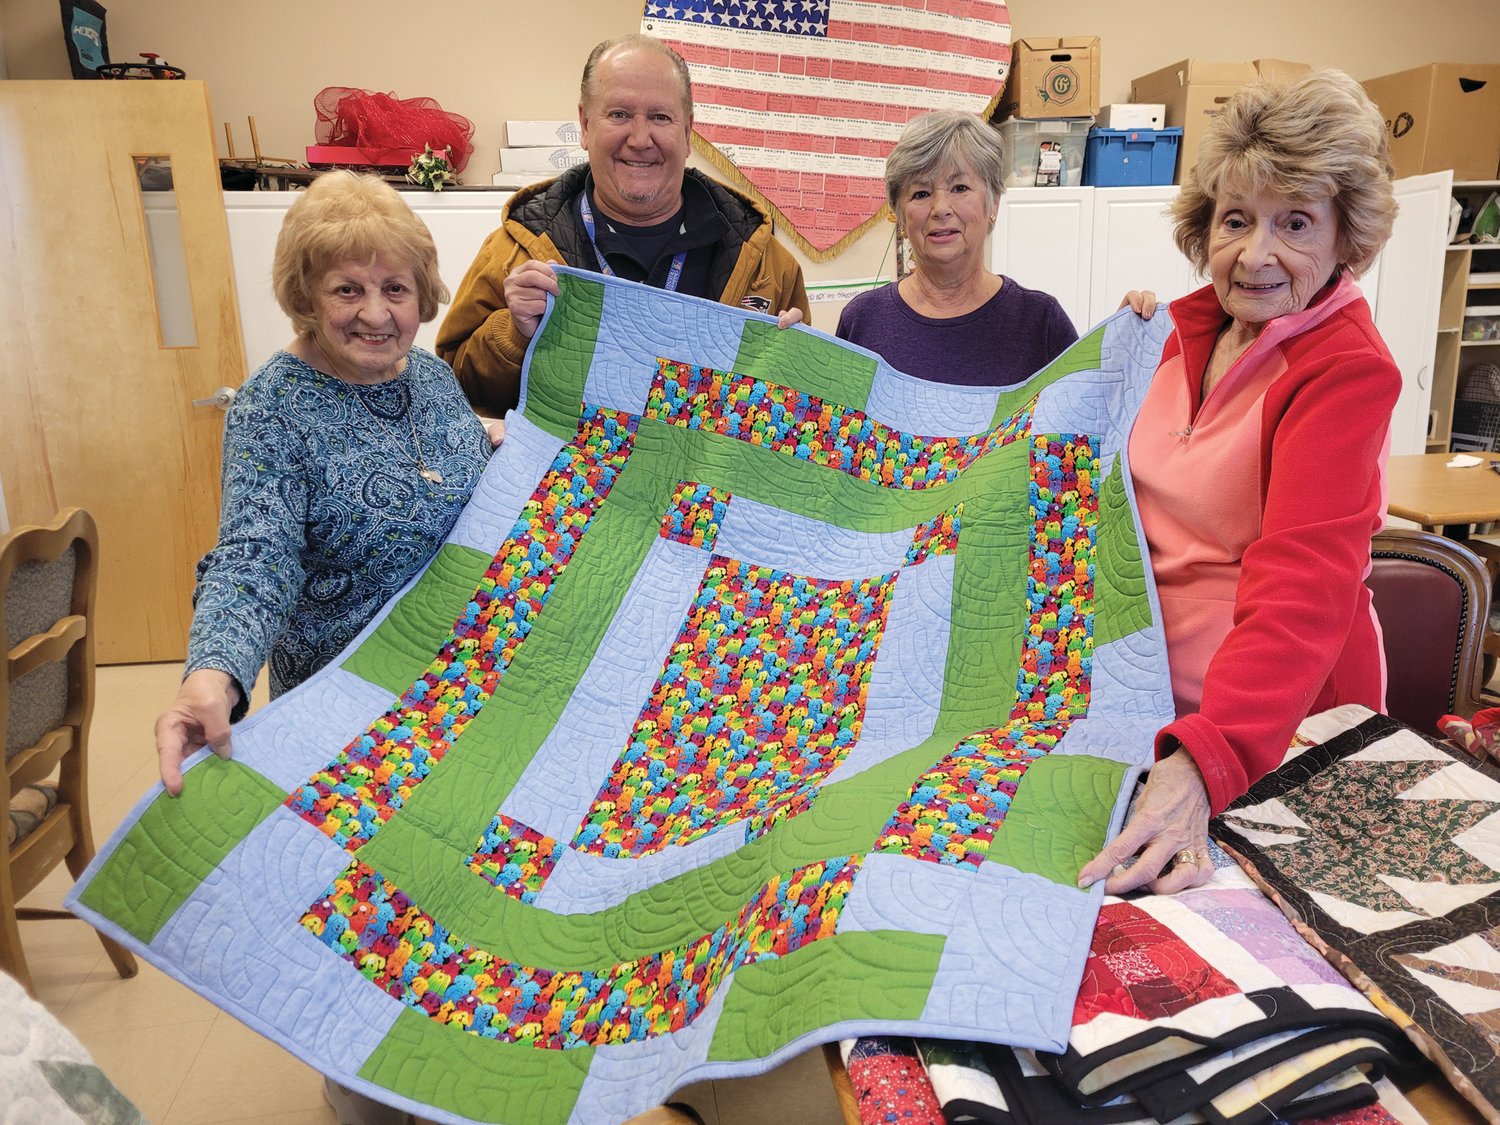 LIKE PATCHWORK: Members of the Giving Quilt Group at the Johnston Senior Center, from left to right, Marie Lanzi, Fran Zanni and Betty Bryda, check out a quilt they plan to send with John Reis (second from left), a caseworker with Children’s Friend and Services’ Project Connect.